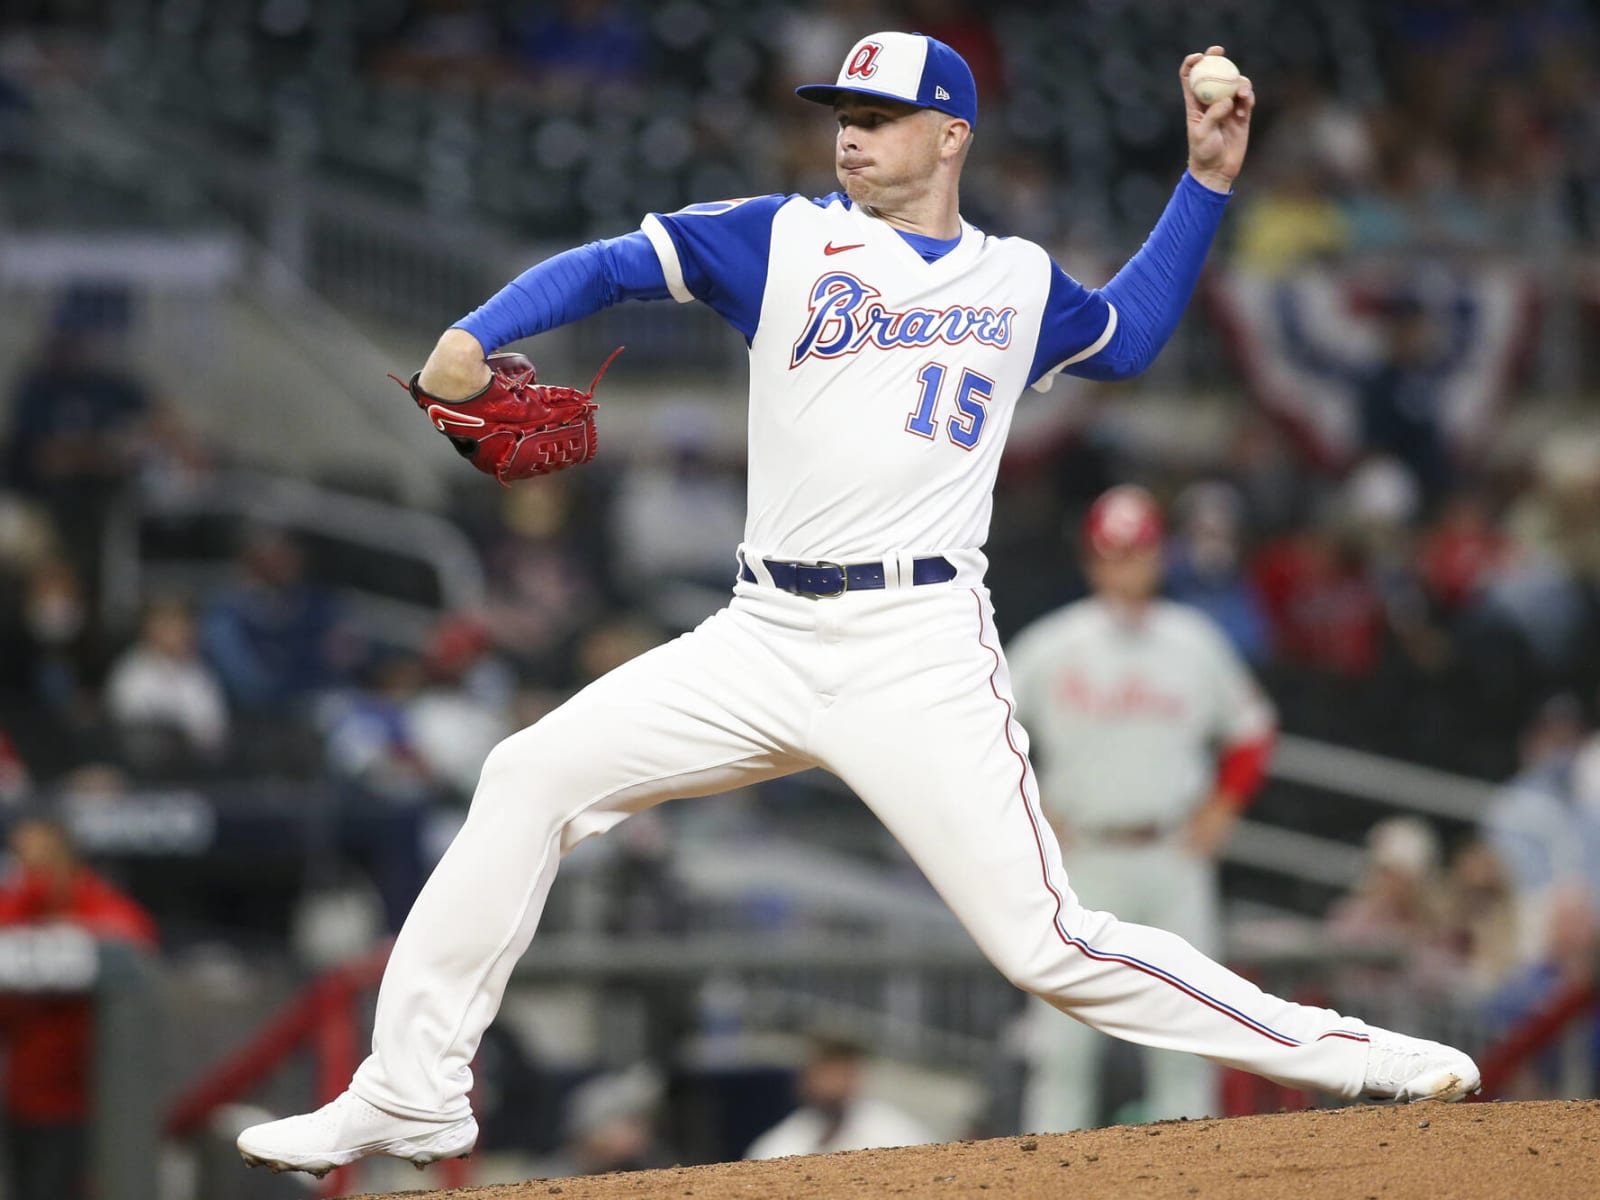 Cubs Trade RHP Jesse Chavez to Braves for LHP Sean Newcomb - On